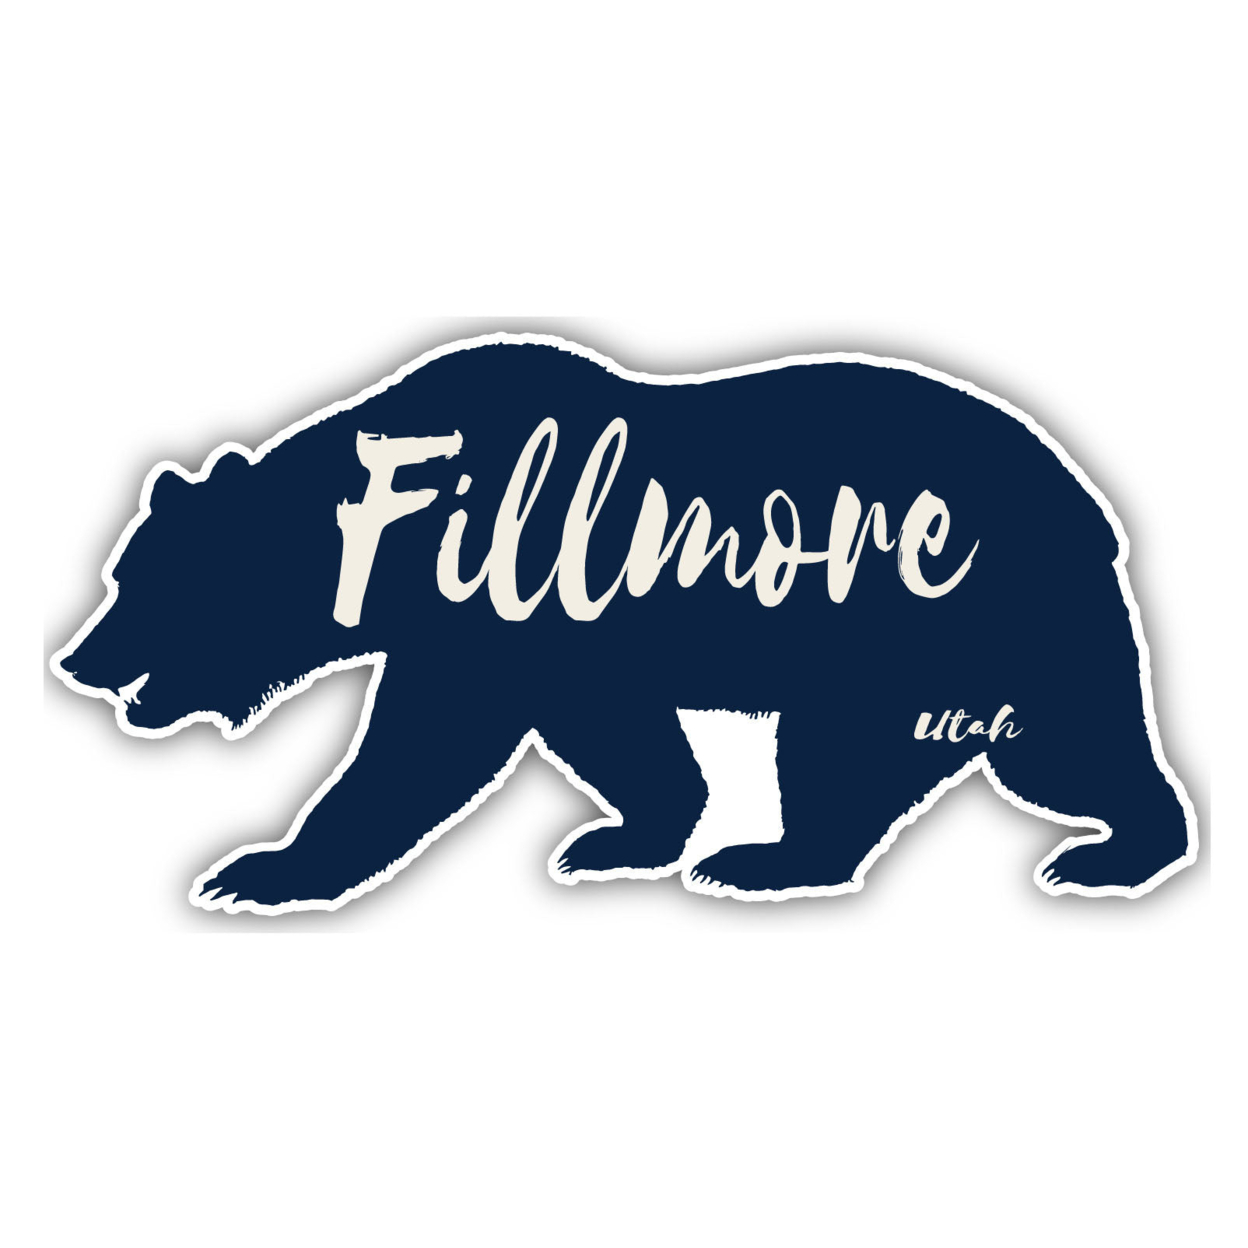 Fillmore Utah Souvenir Decorative Stickers (Choose Theme And Size) - 4-Pack, 10-Inch, Bear